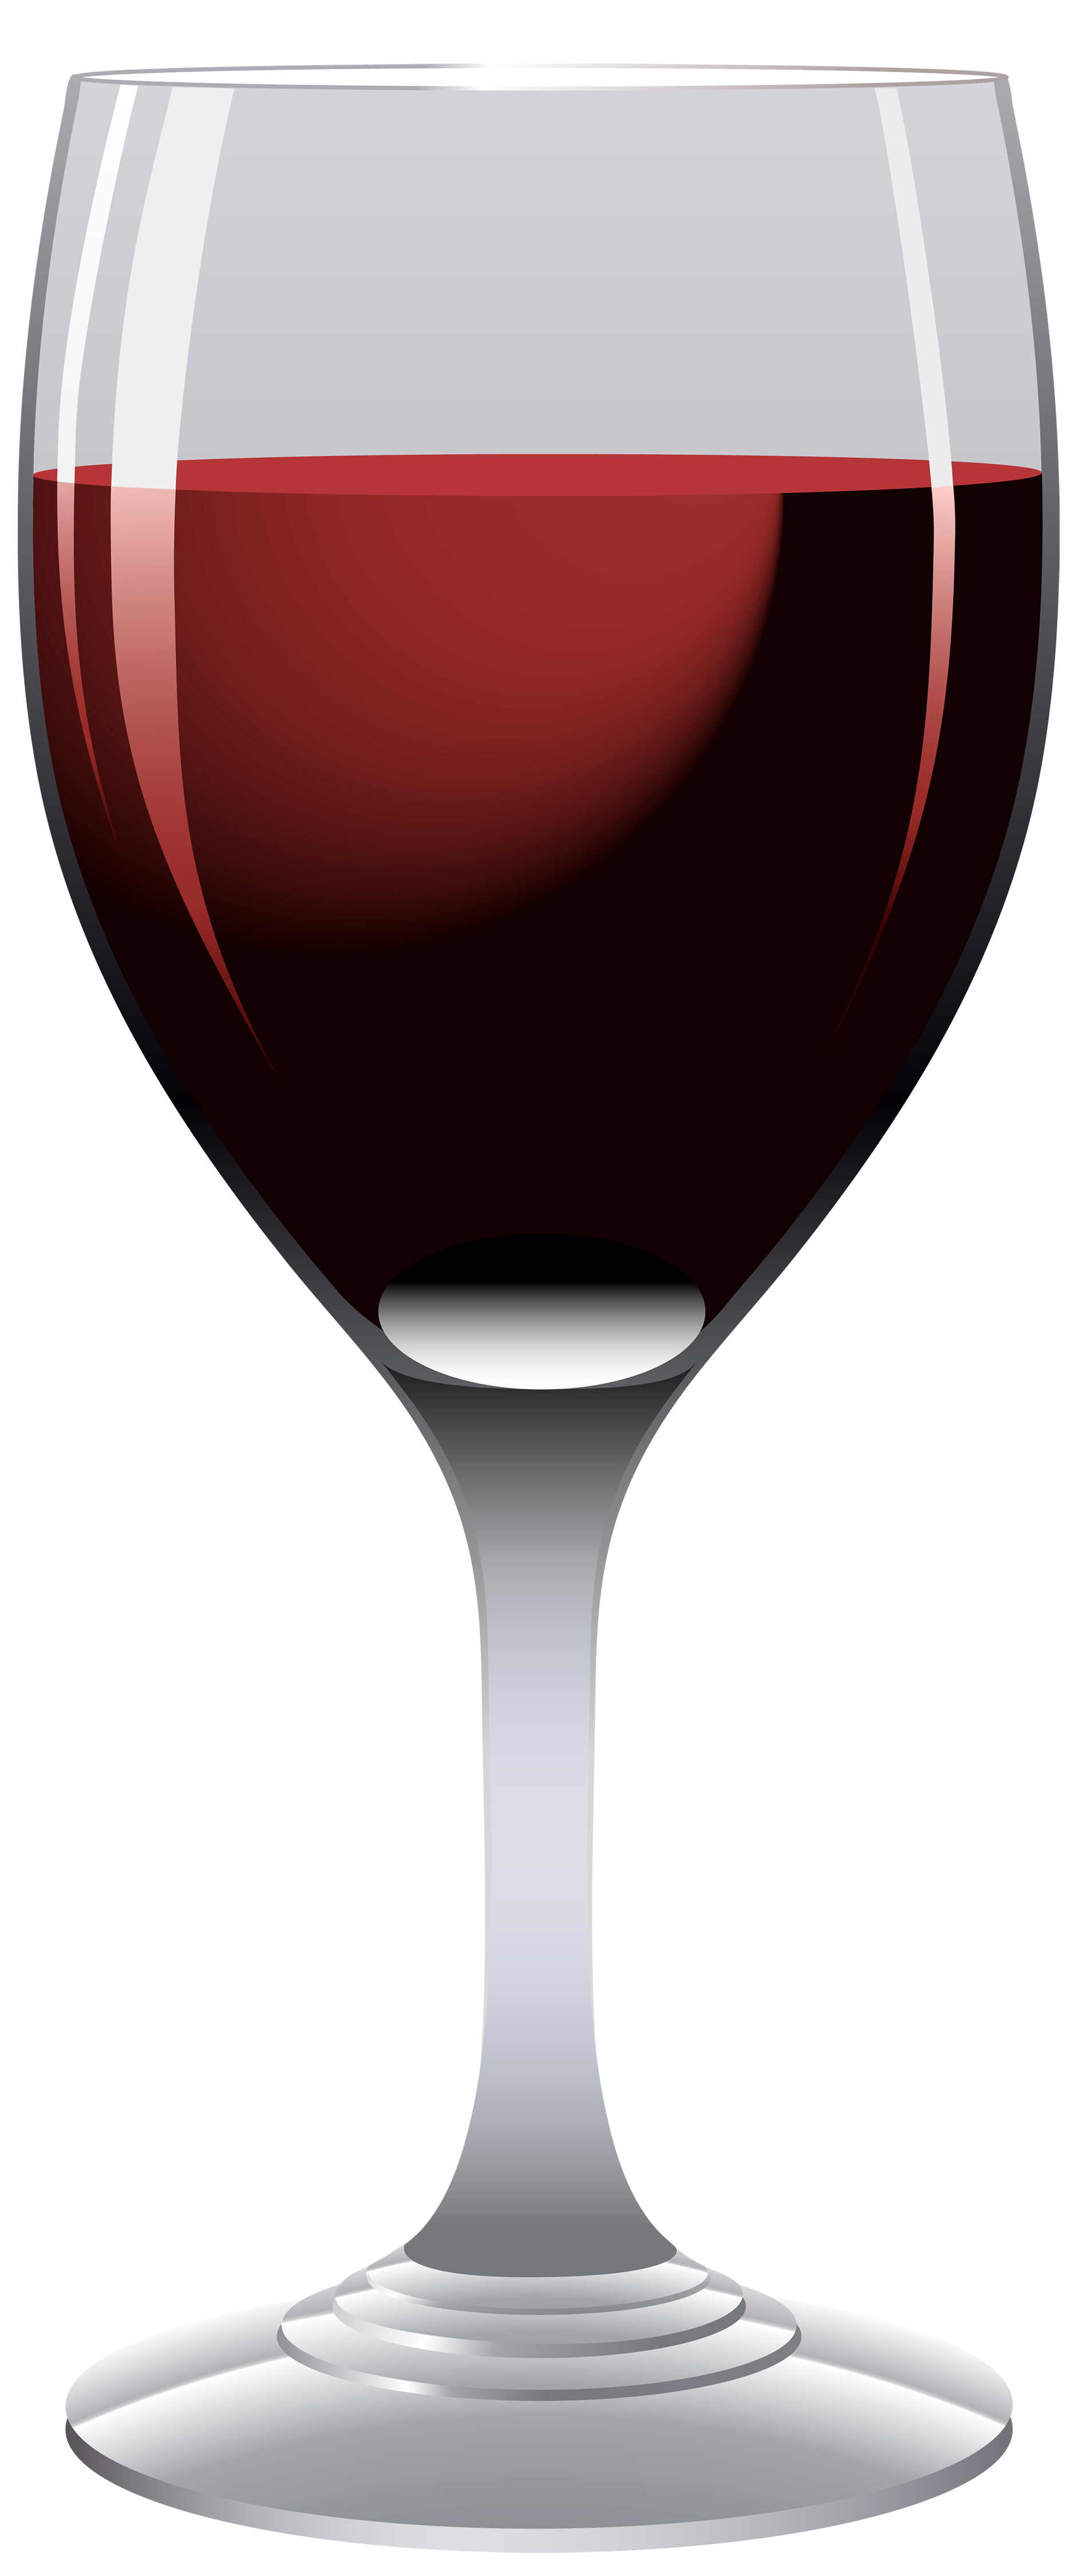 Free clip art wine glasses free vector for download about 2 2